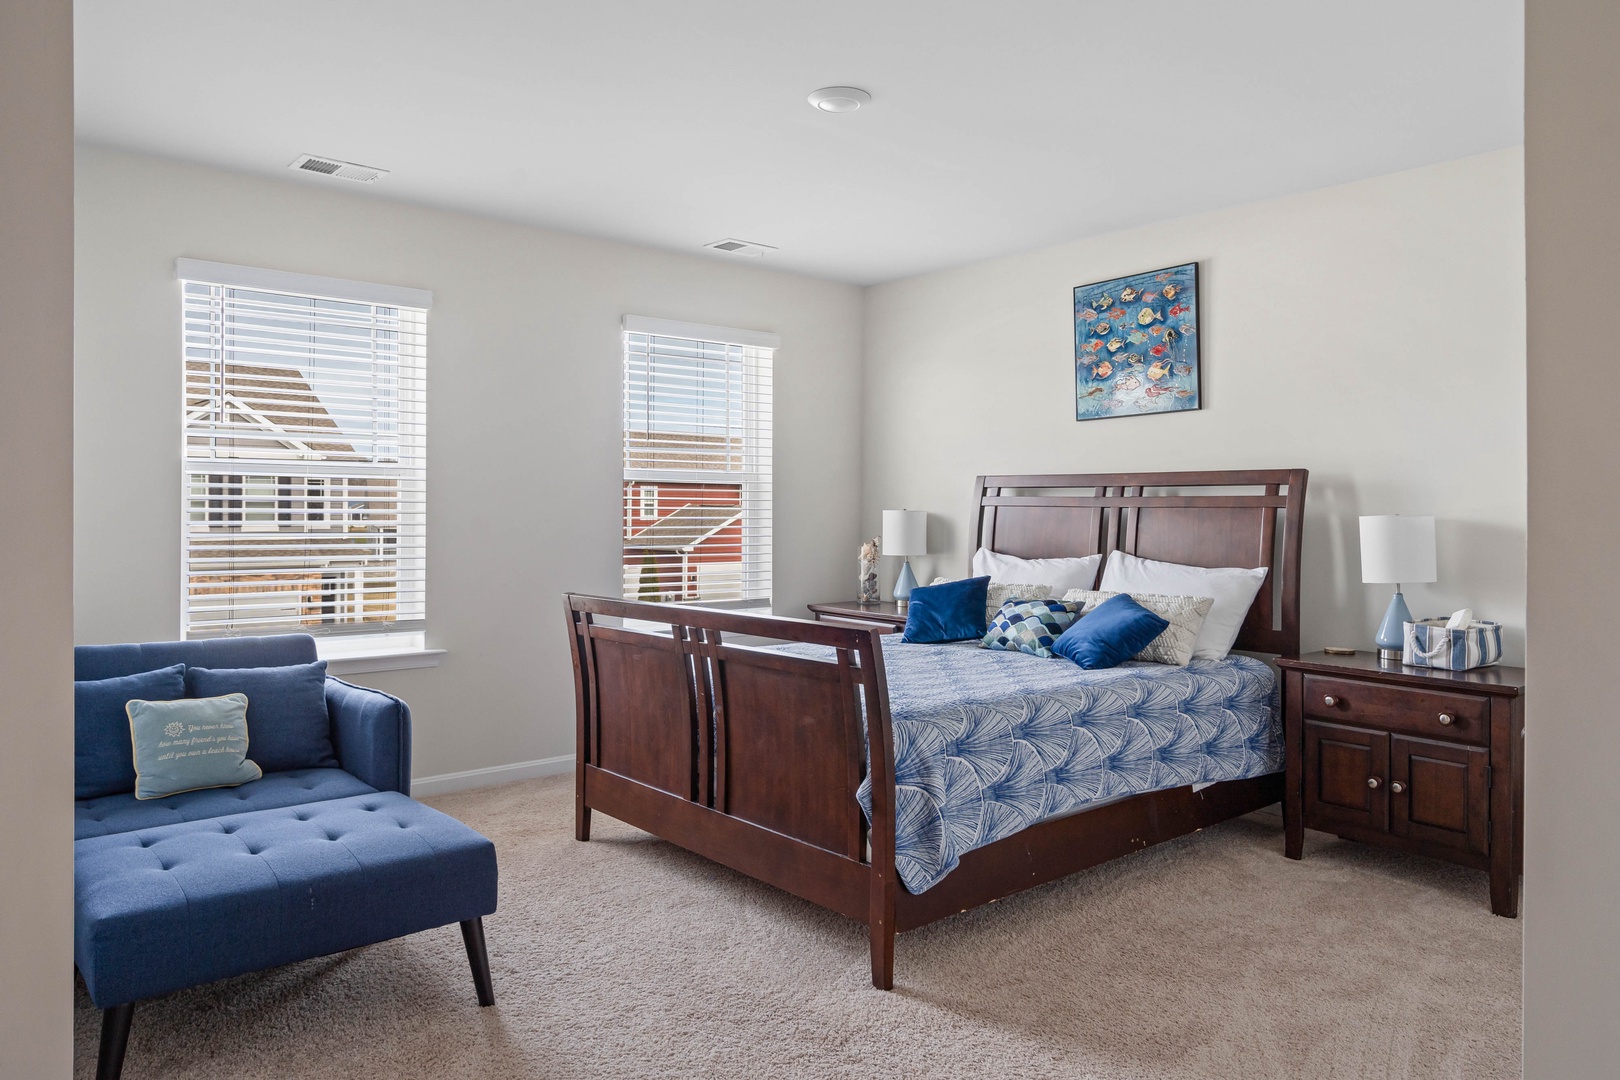 This 2nd floor bedroom retreat showcases a regal queen bed & lounge chair